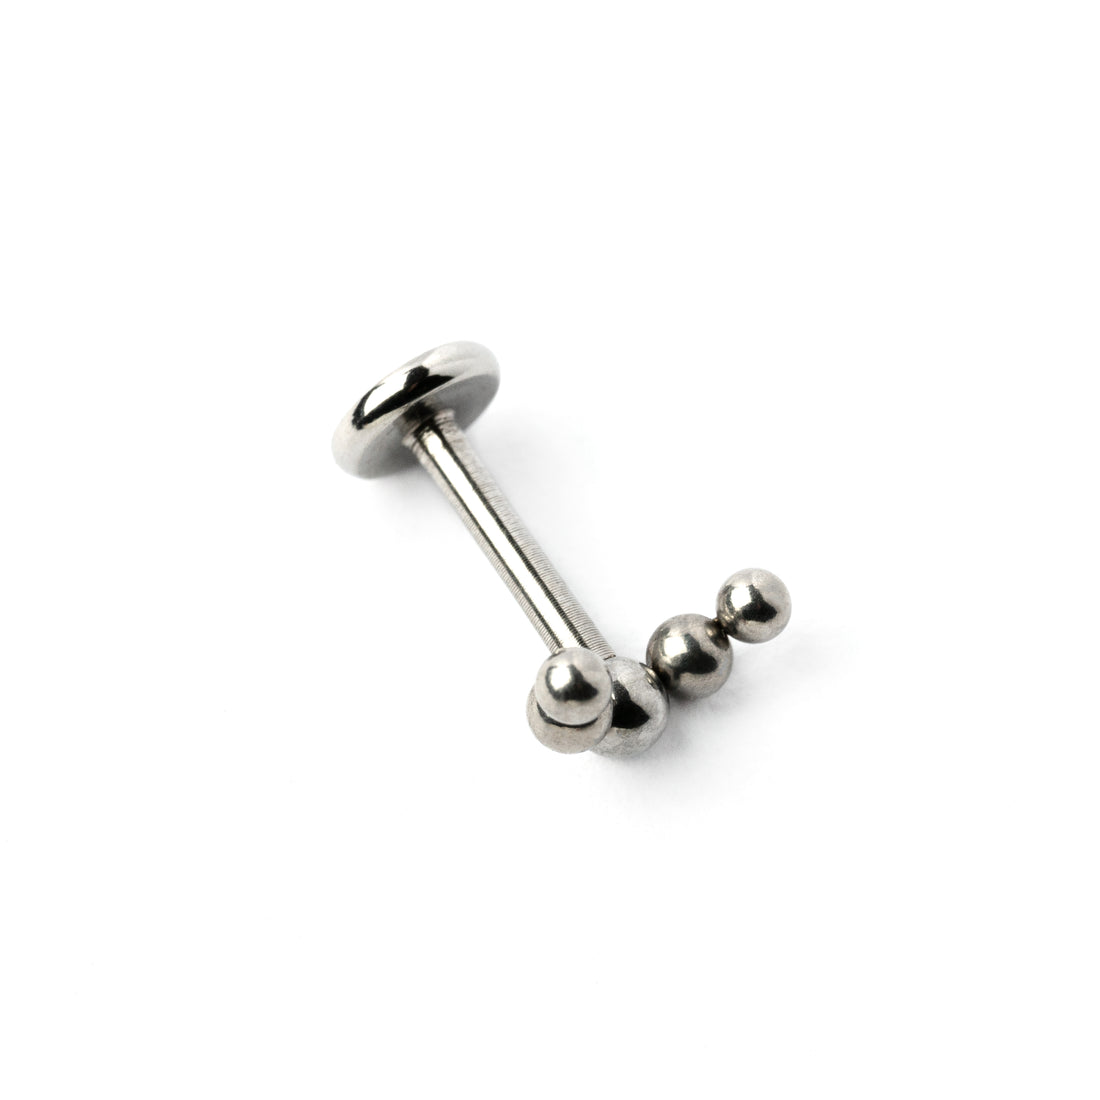 Surgical steel Almora internally threaded labret side view